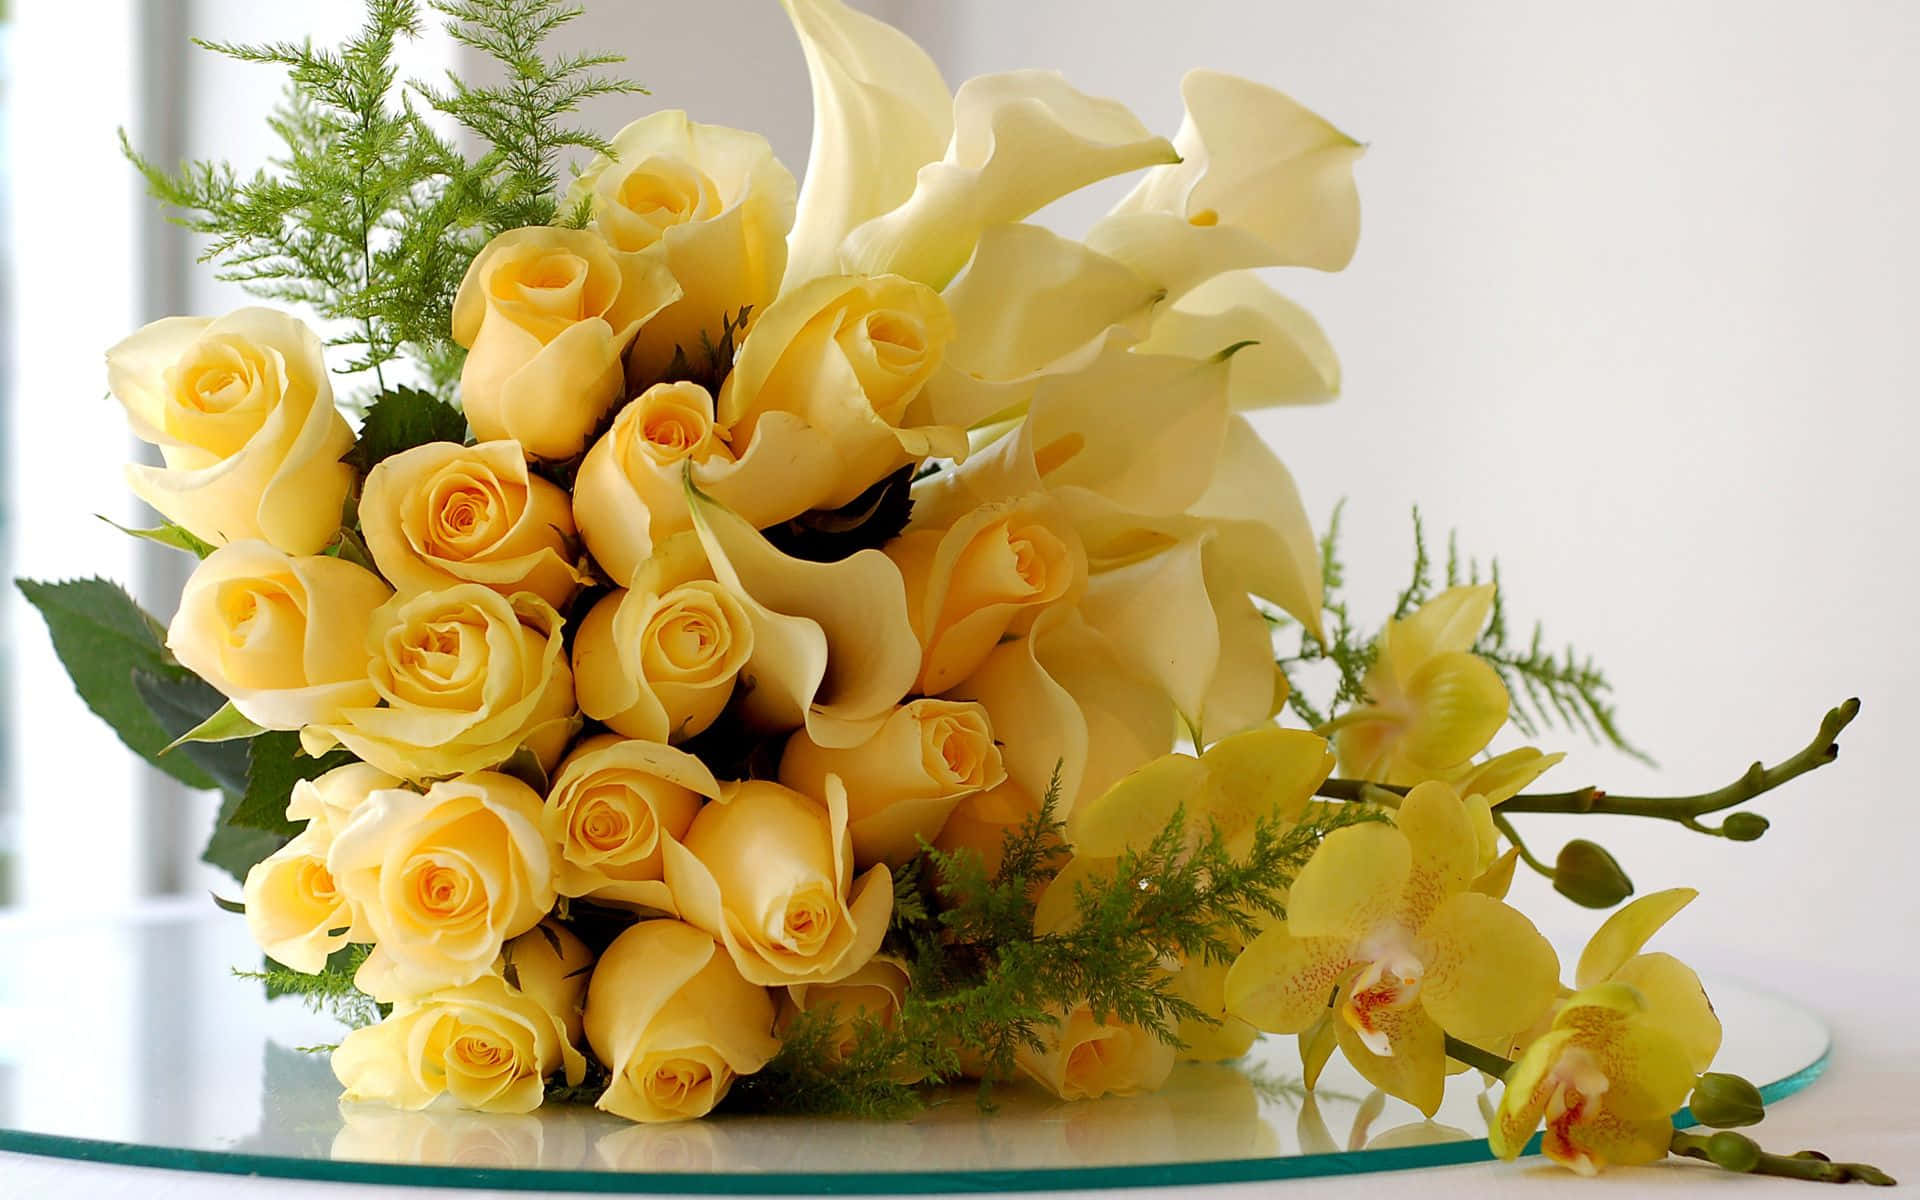 Bring beauty and freshness to your home with a personalised flower arrangement from a local florist." Wallpaper